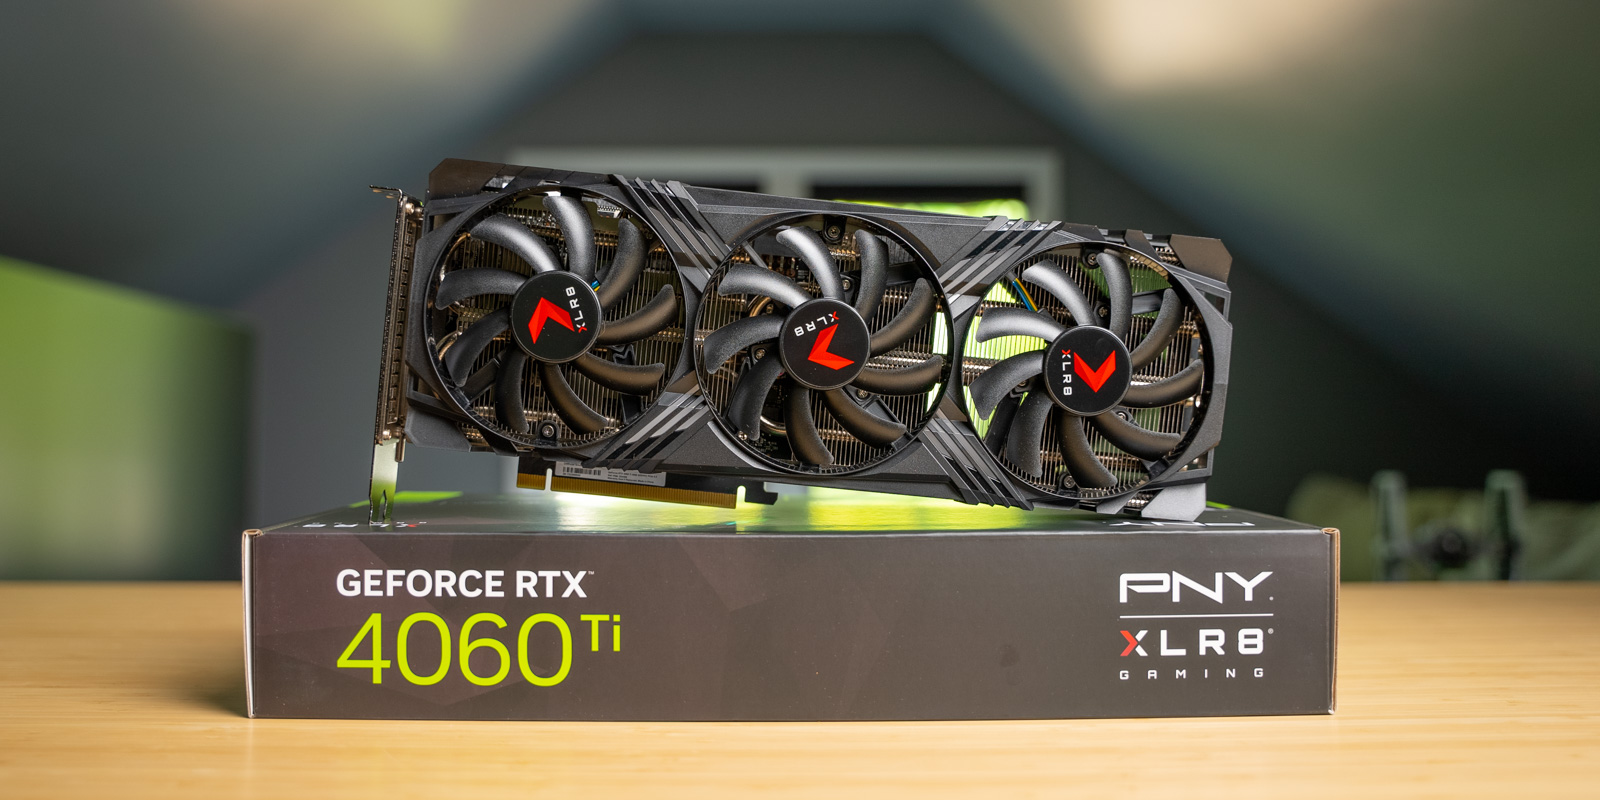 PNY 4060 Ti 8GB review: XLR8's $449 card with latest NVIDIA tech